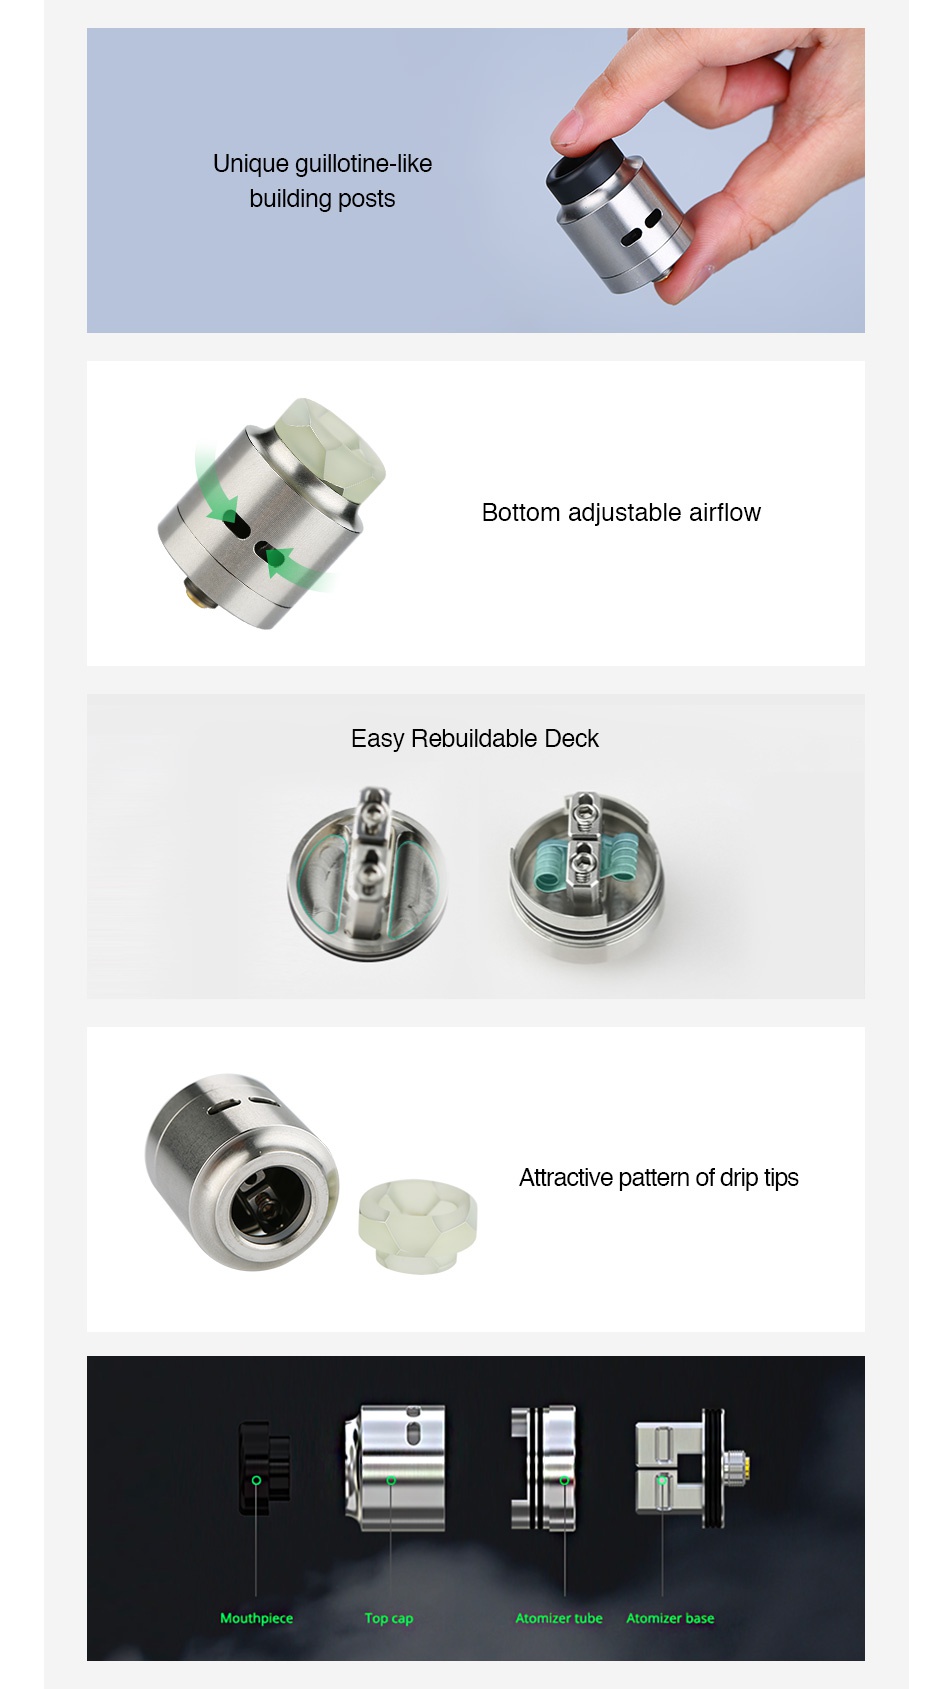 WISMEC Guillotine RDA Unique guillotine like building posts Bottom adiustable airflow Easy rebuildable Deck Attractive pattern of drip tips Mouthpiece Top cap Atomizer tub Atomizer base